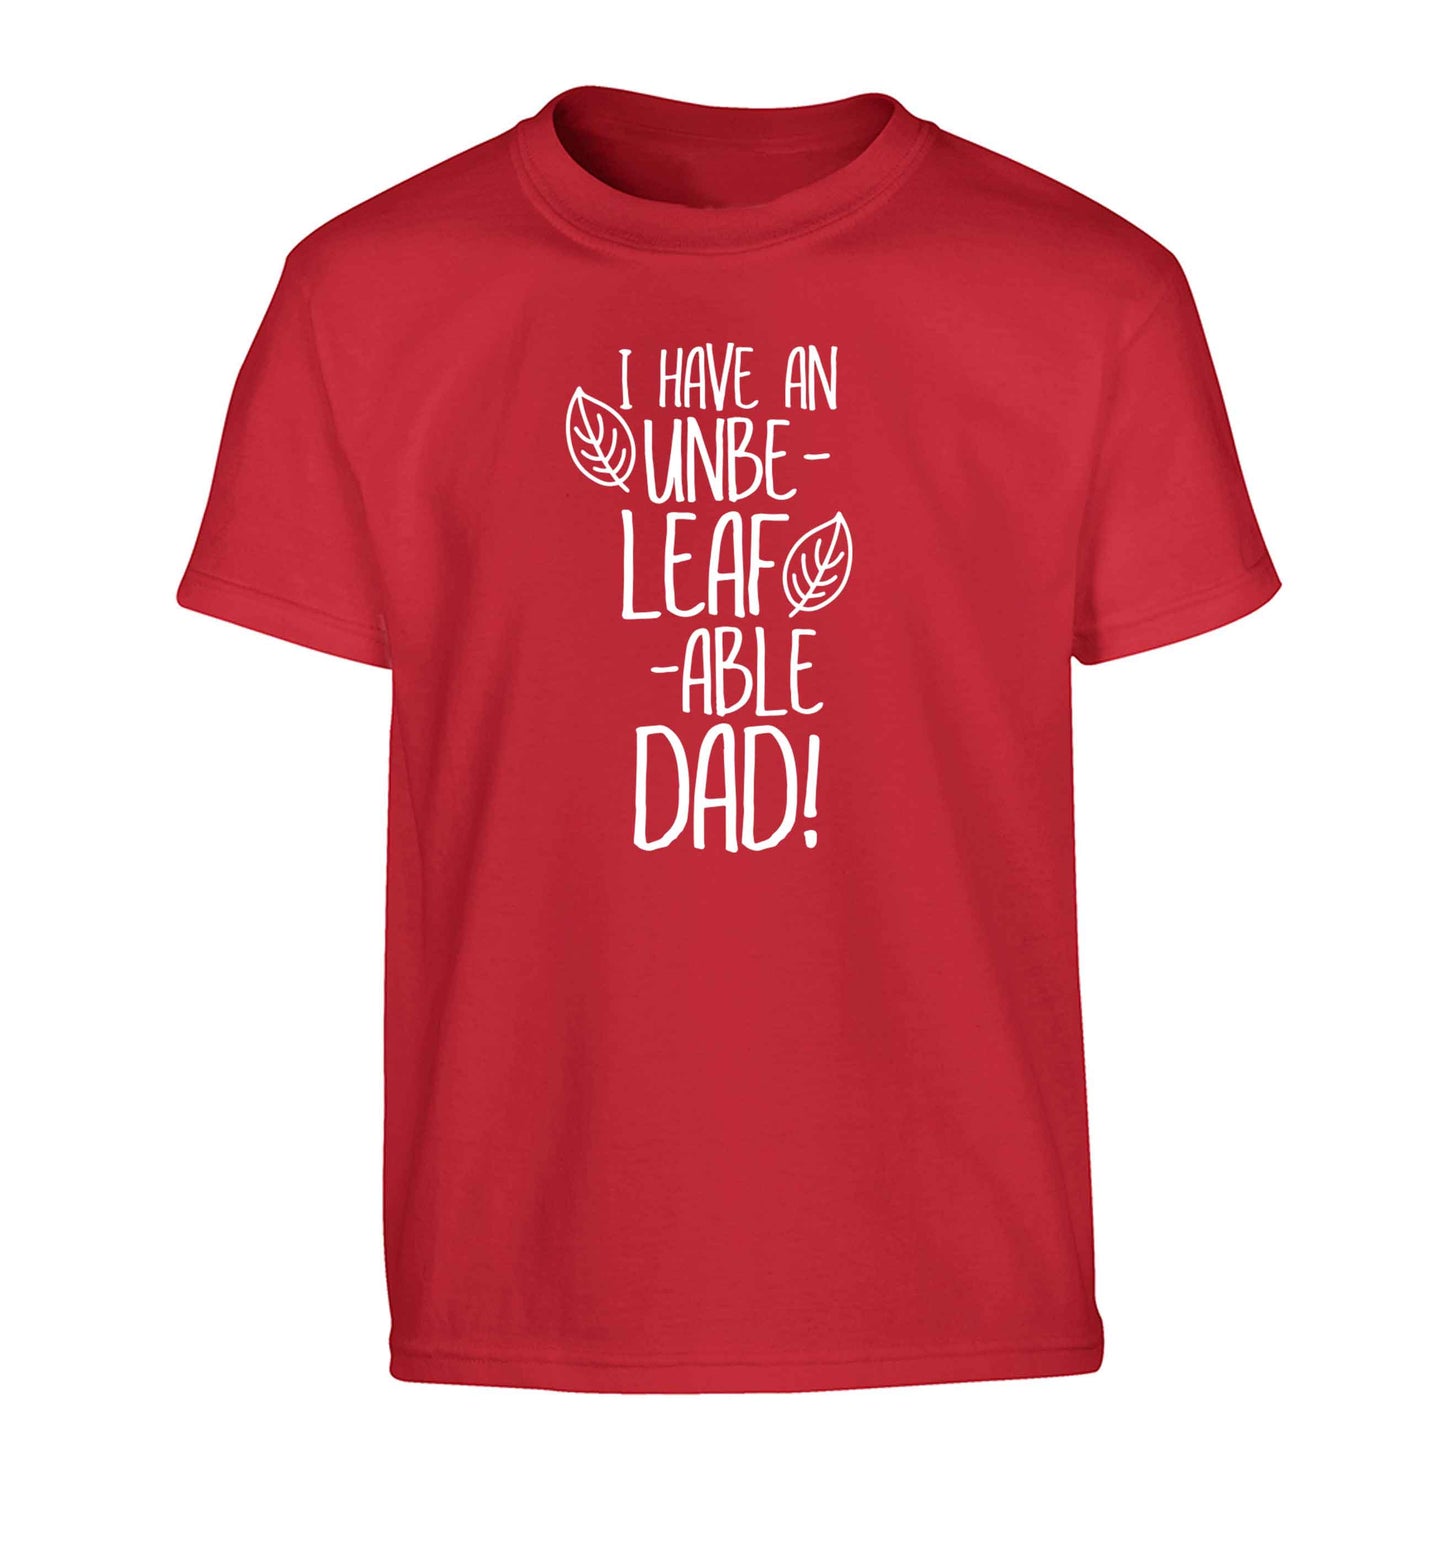 I have an unbe-leaf-able dad Children's red Tshirt 12-13 Years